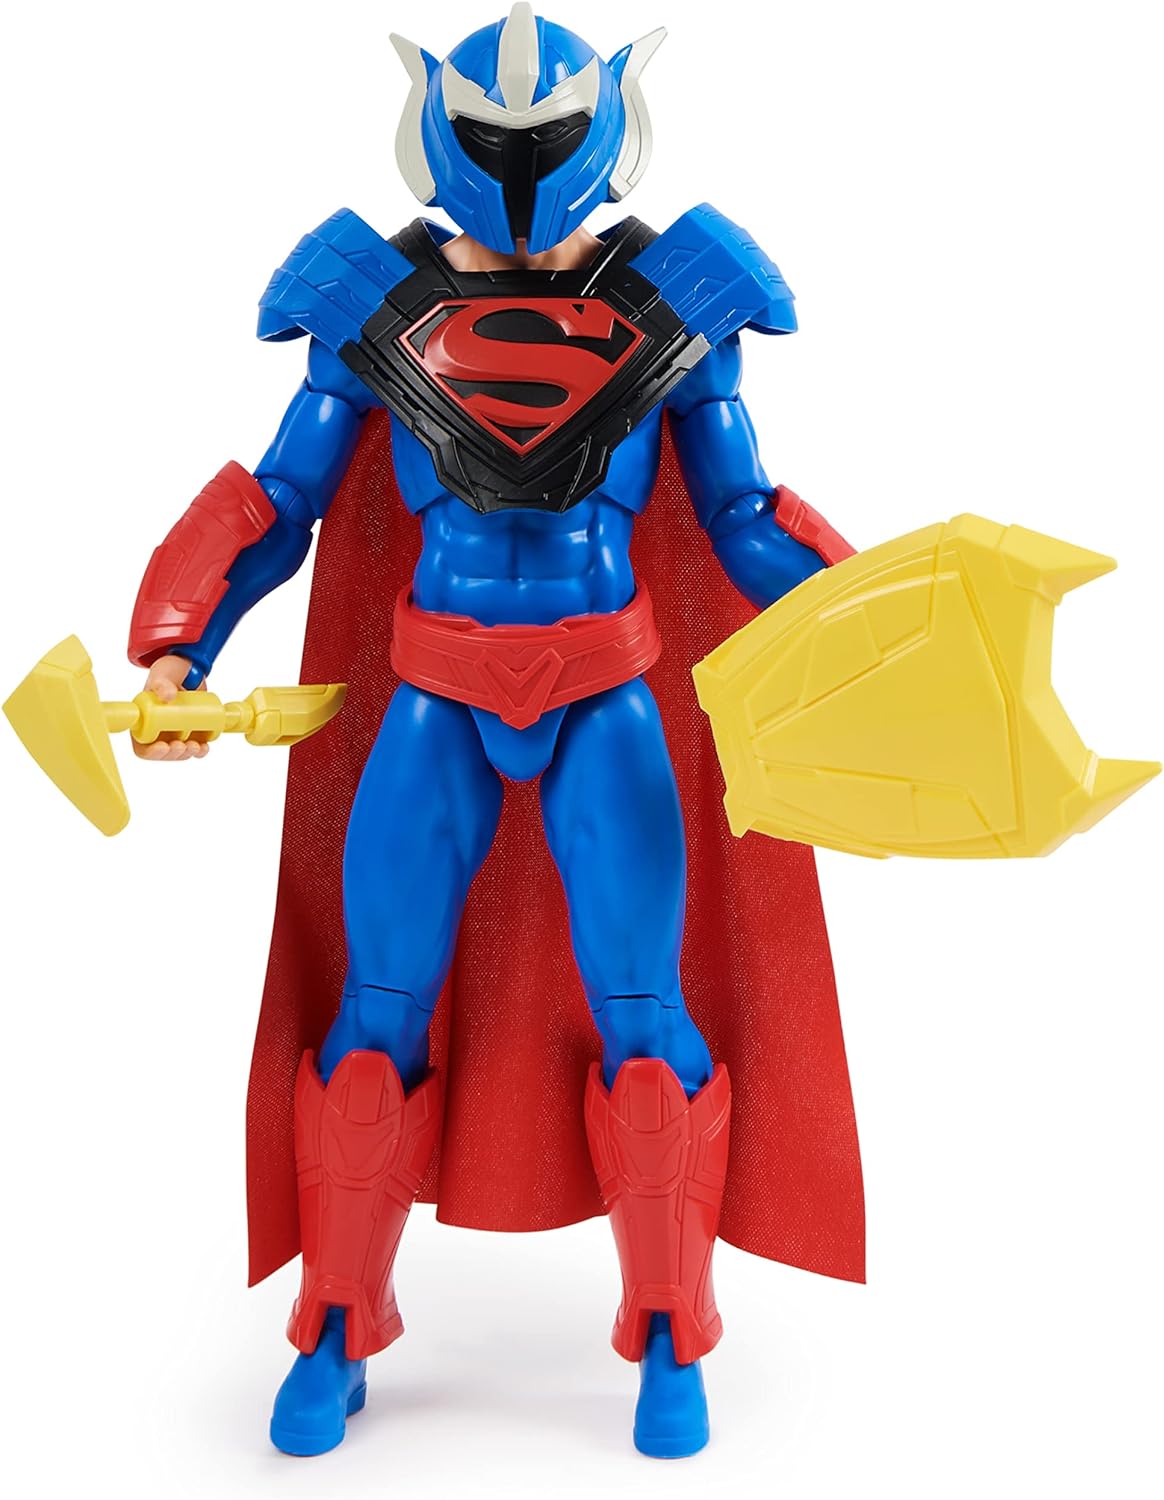 Spin Master DC Comics, Superman Man of Steel Action Figure, DC Adventures, 12 Inch, 9 Accessories, Collectible Superhero Kids Toys for Boys and Girls, Ages 4+